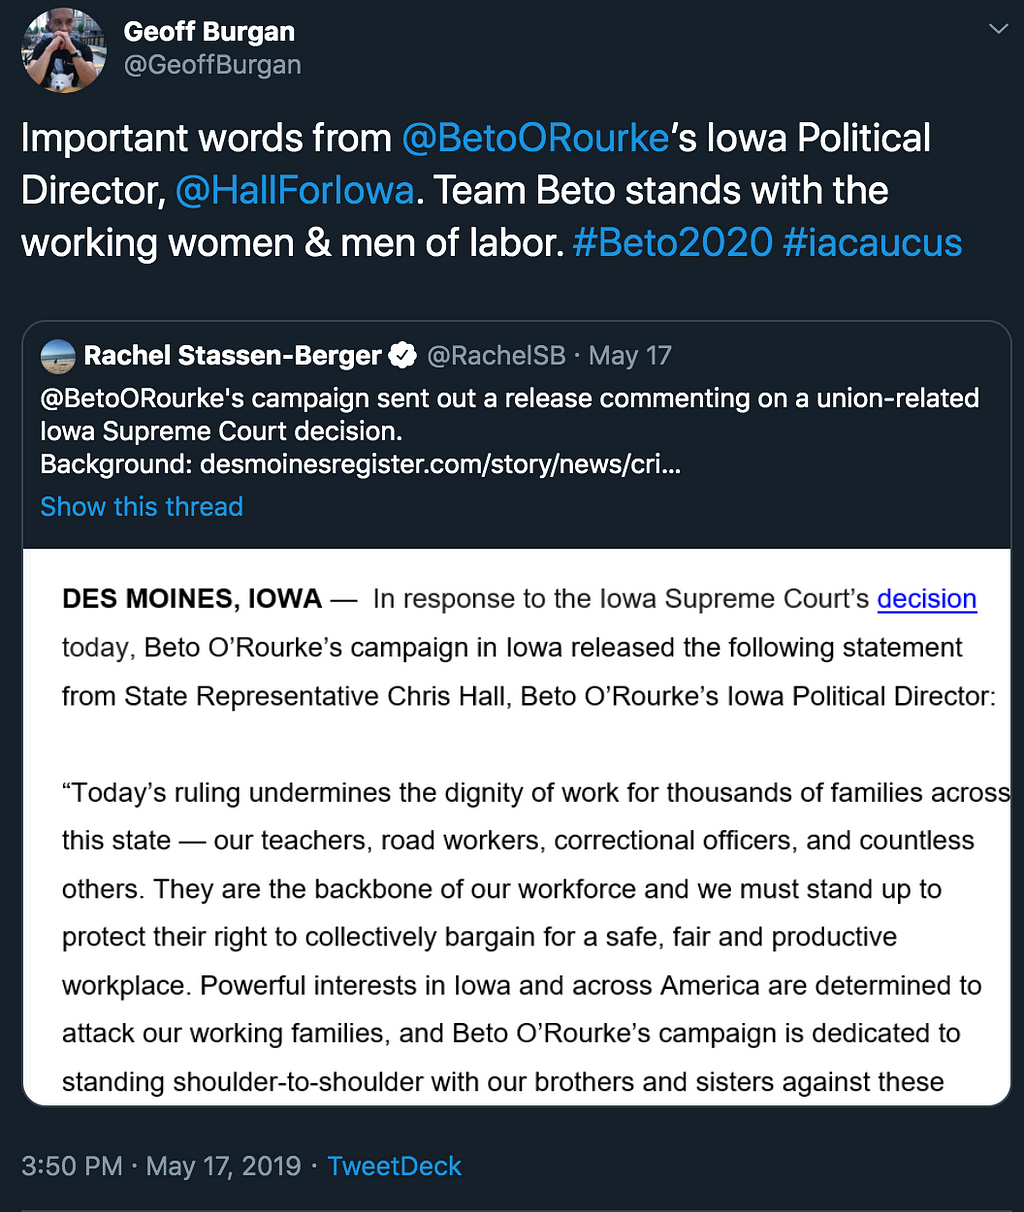 Beto for Iowa opposed the Iowa Supreme Court’s decision that limited the power to collectively bargain in Iowa.